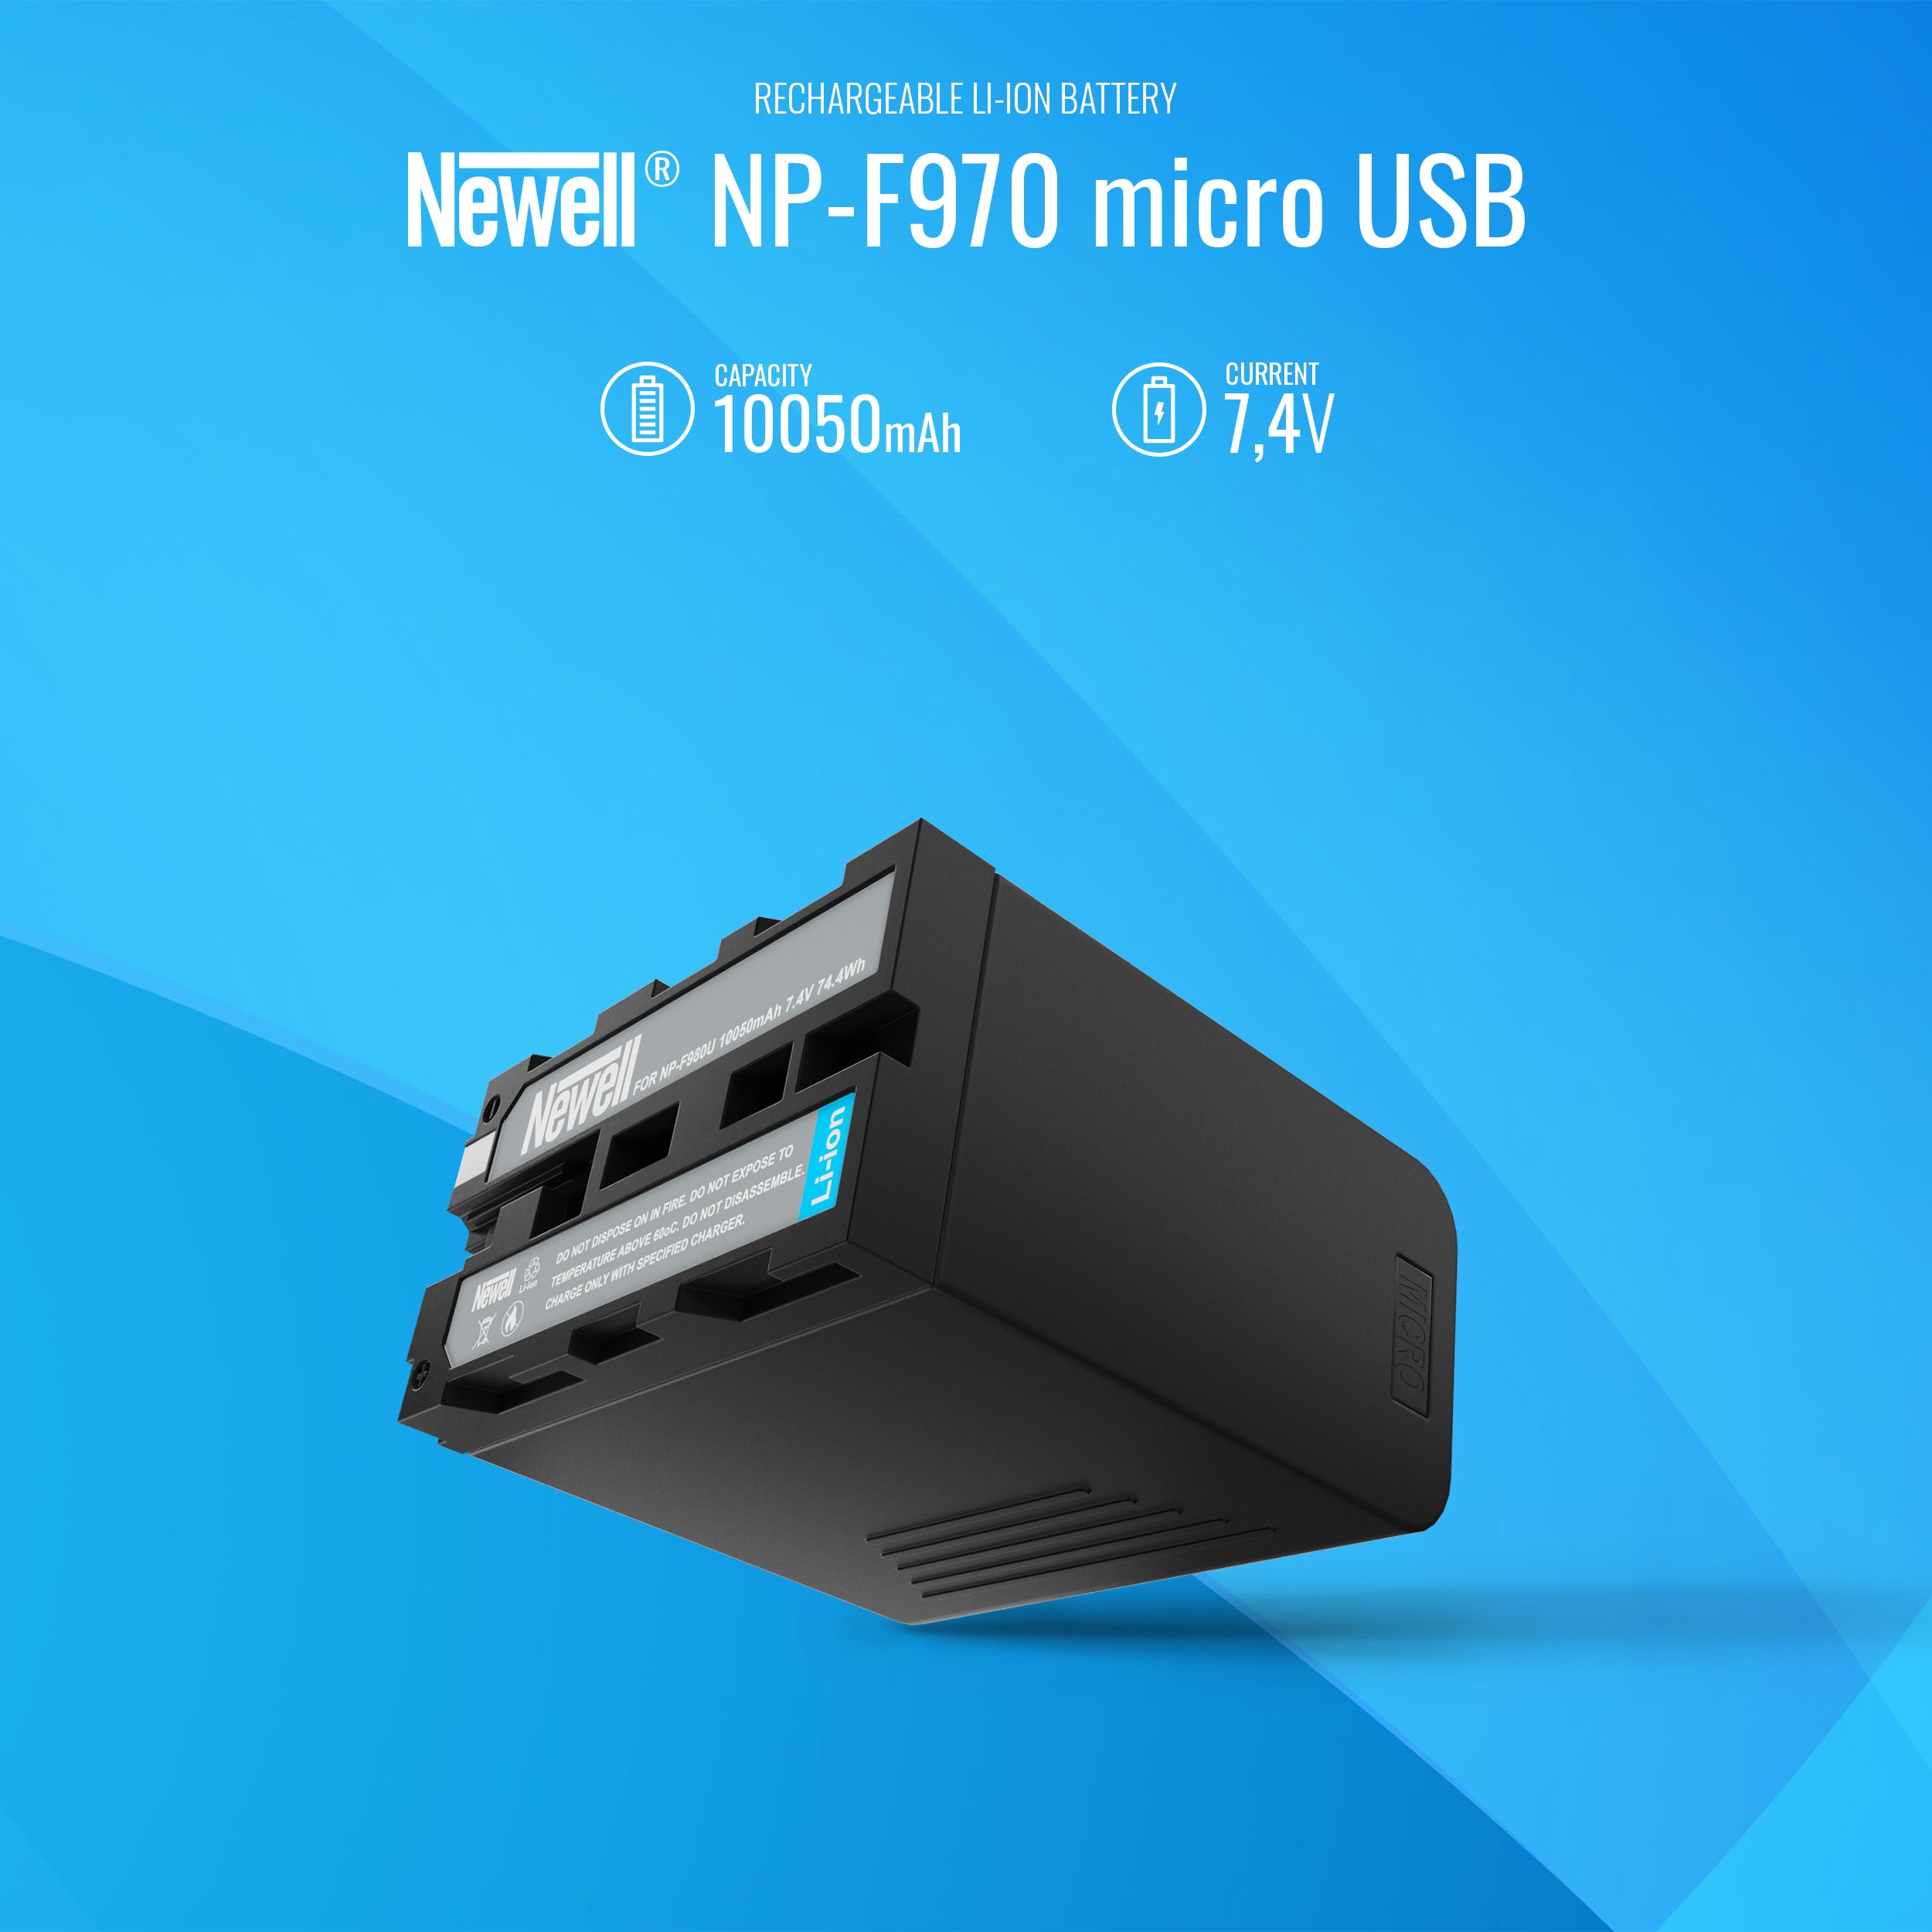 Batterie rechargeable Newell NP-F970 micro USB